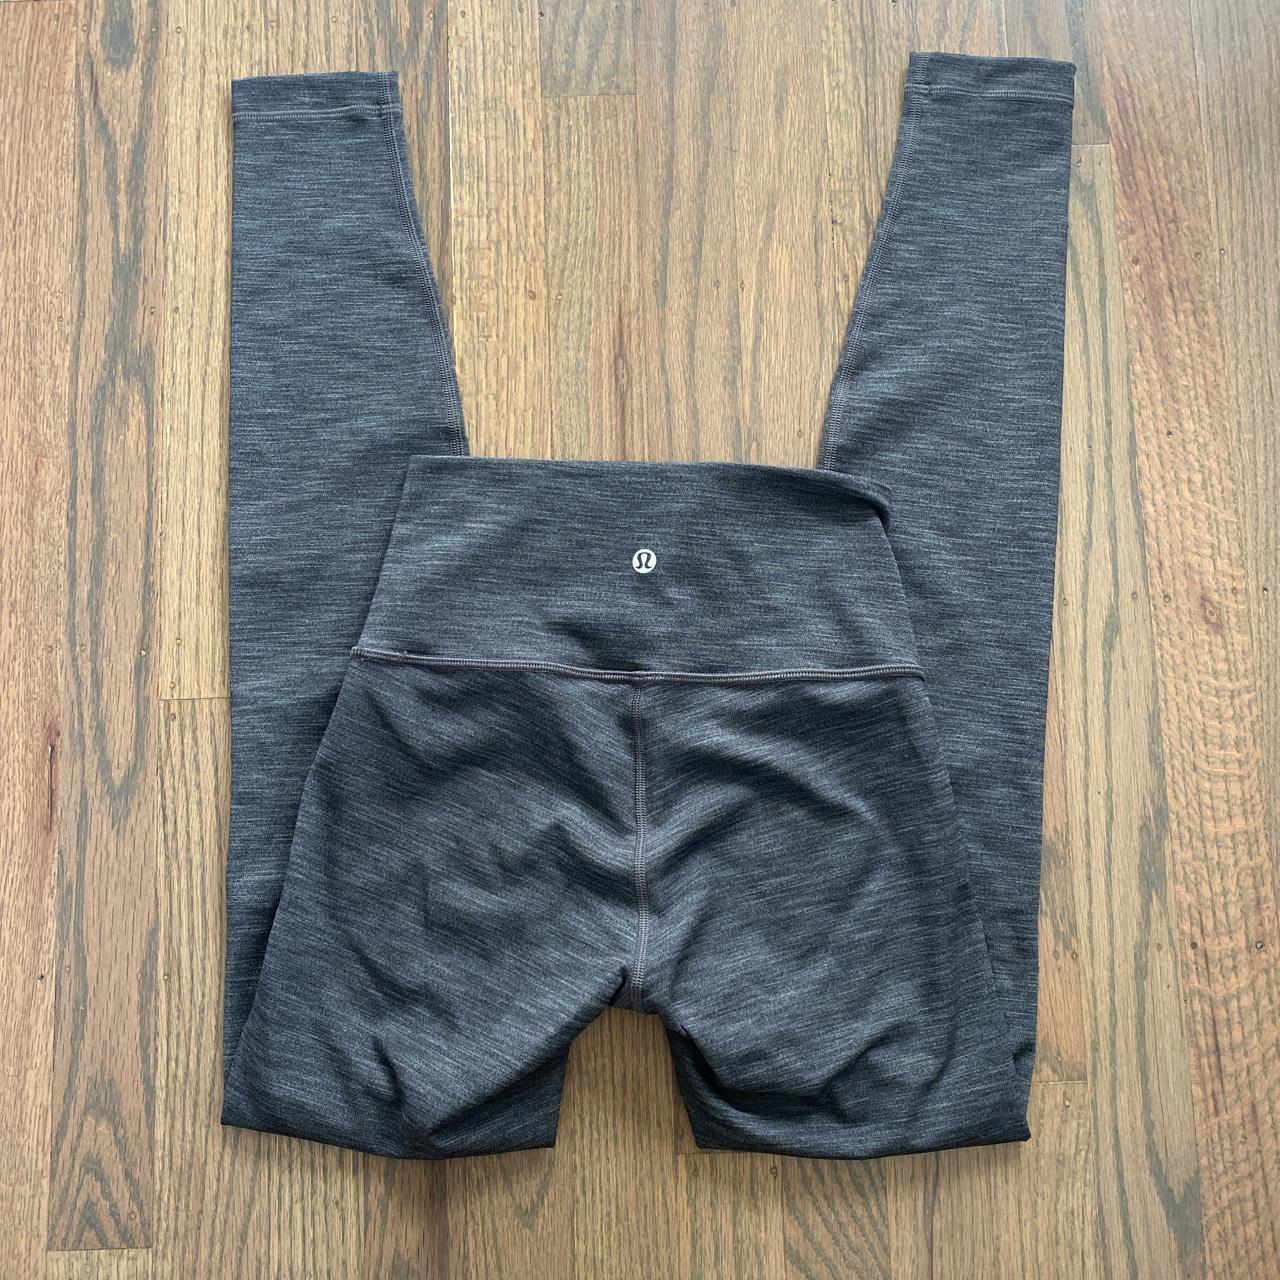 Lululemon Wunder Train High-Rise Tight 28 Color Heathered Graphite Grey  Size 6